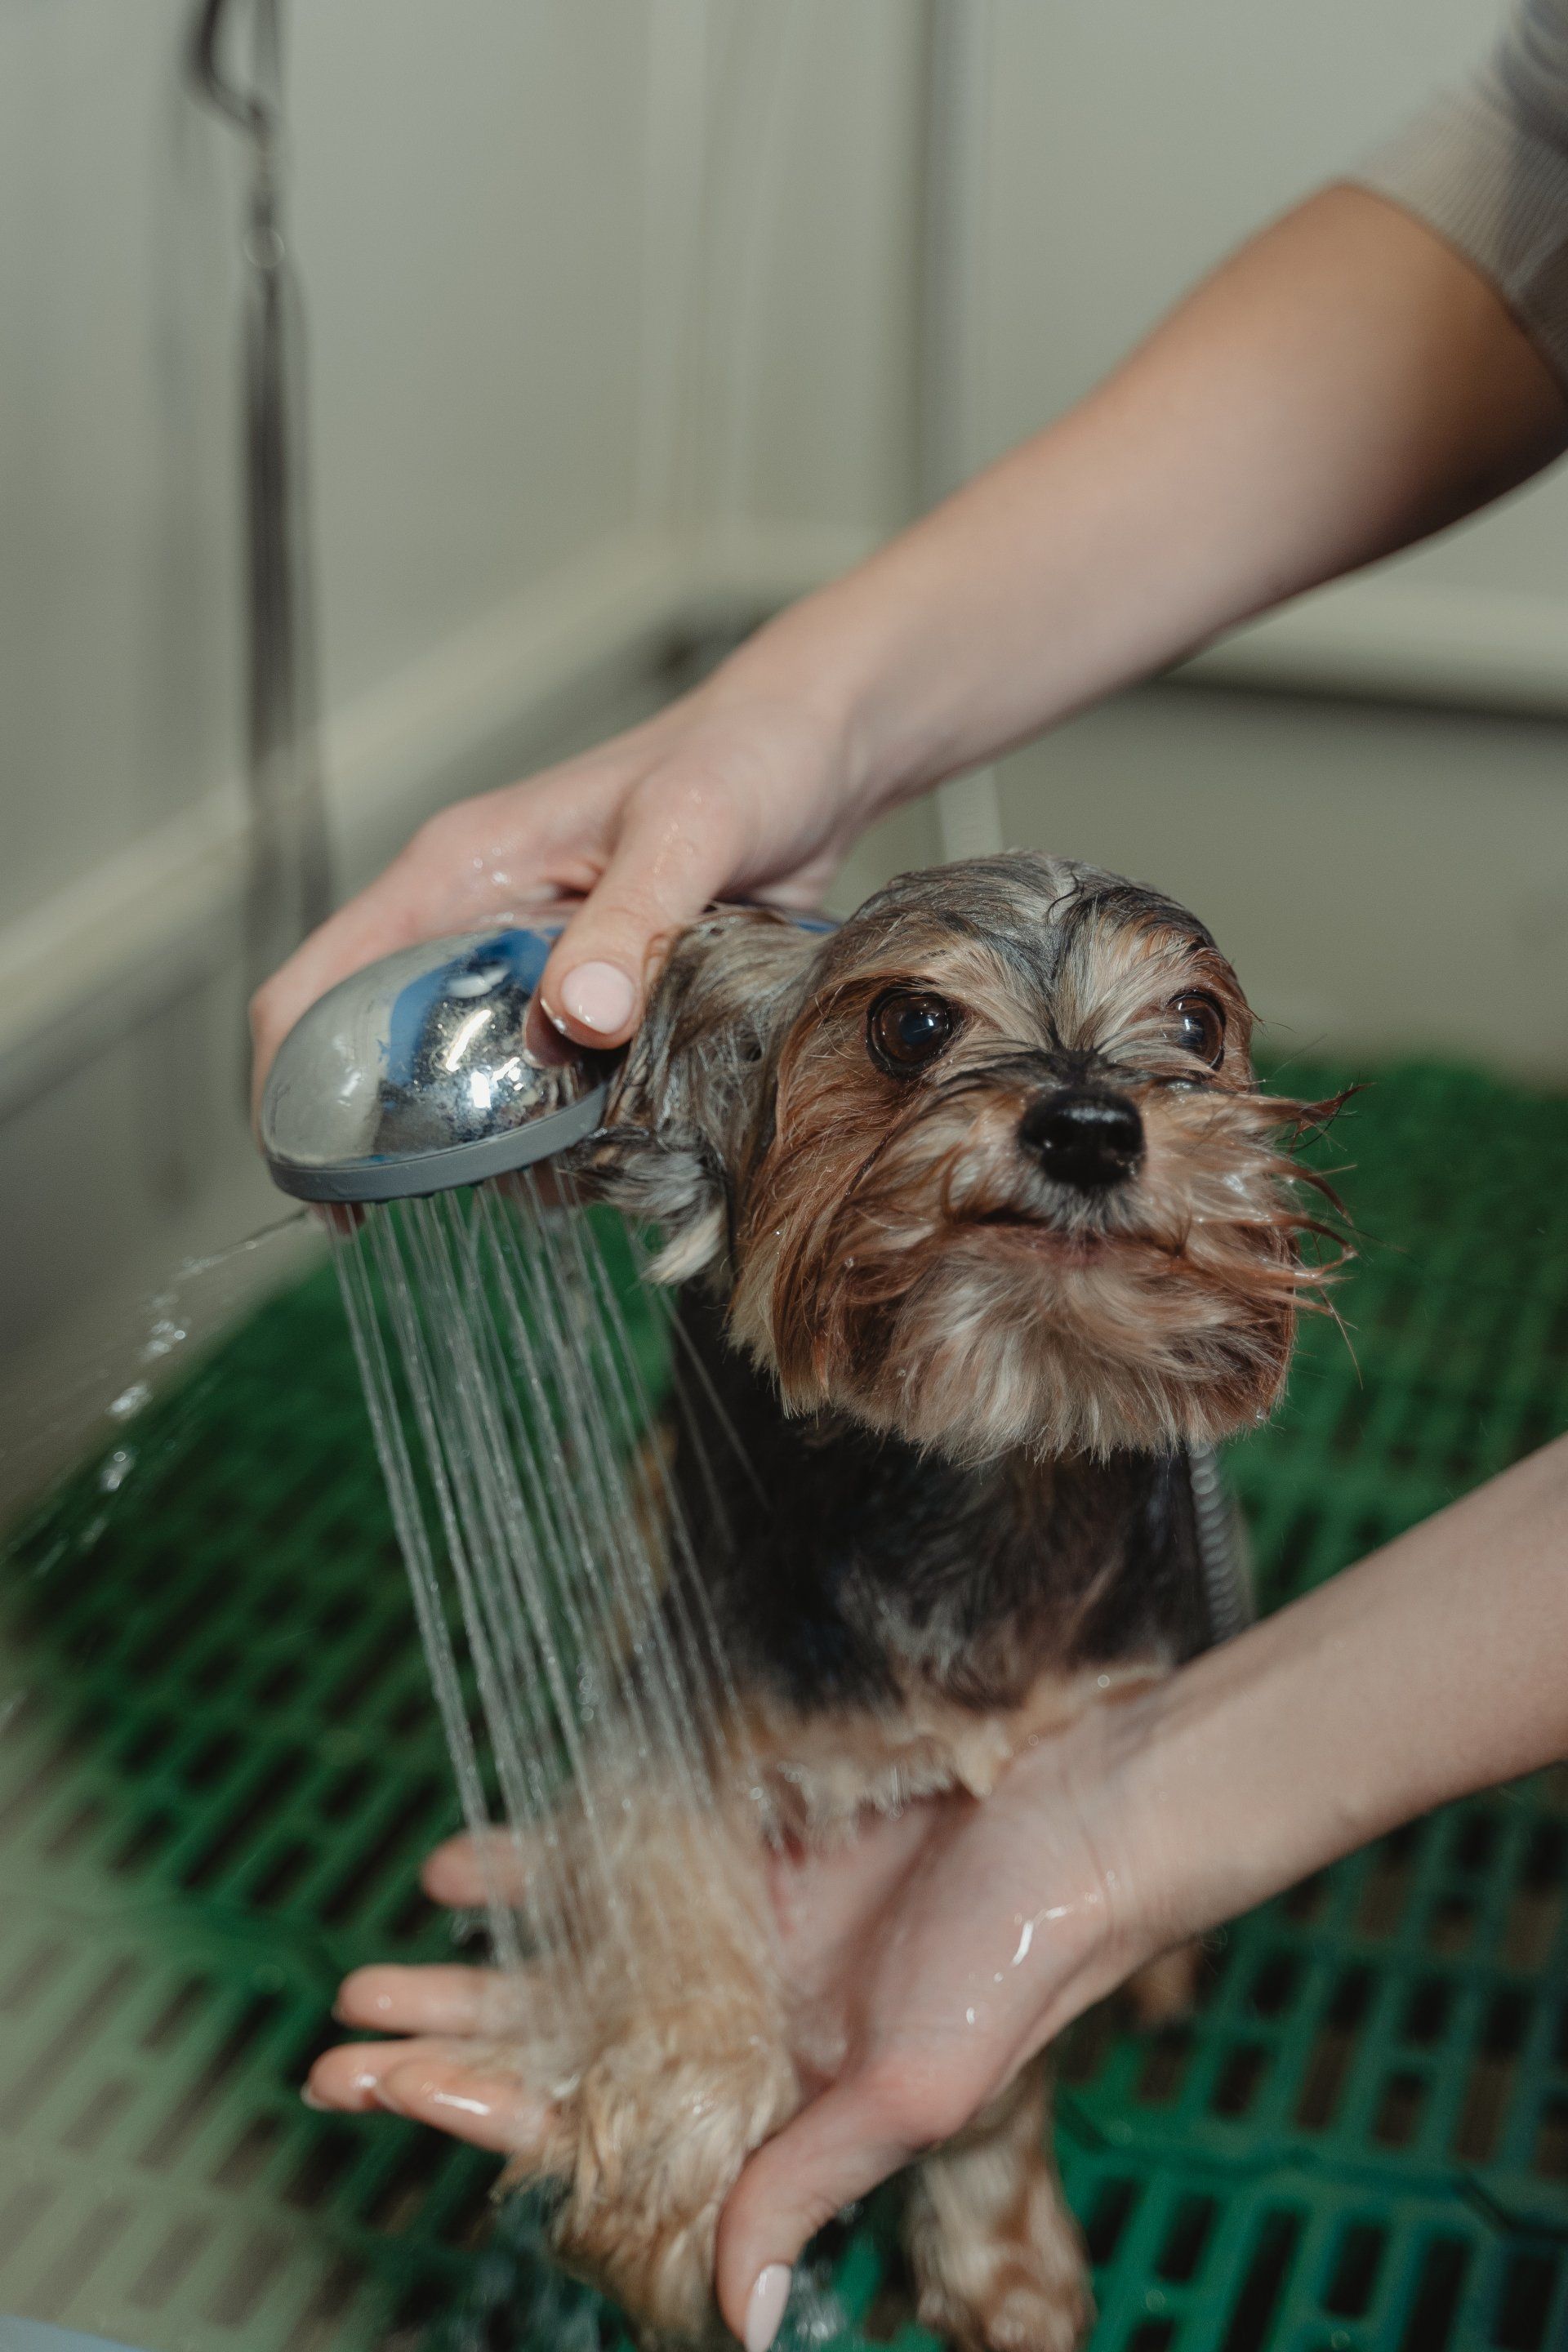 Dog being groomed and washed